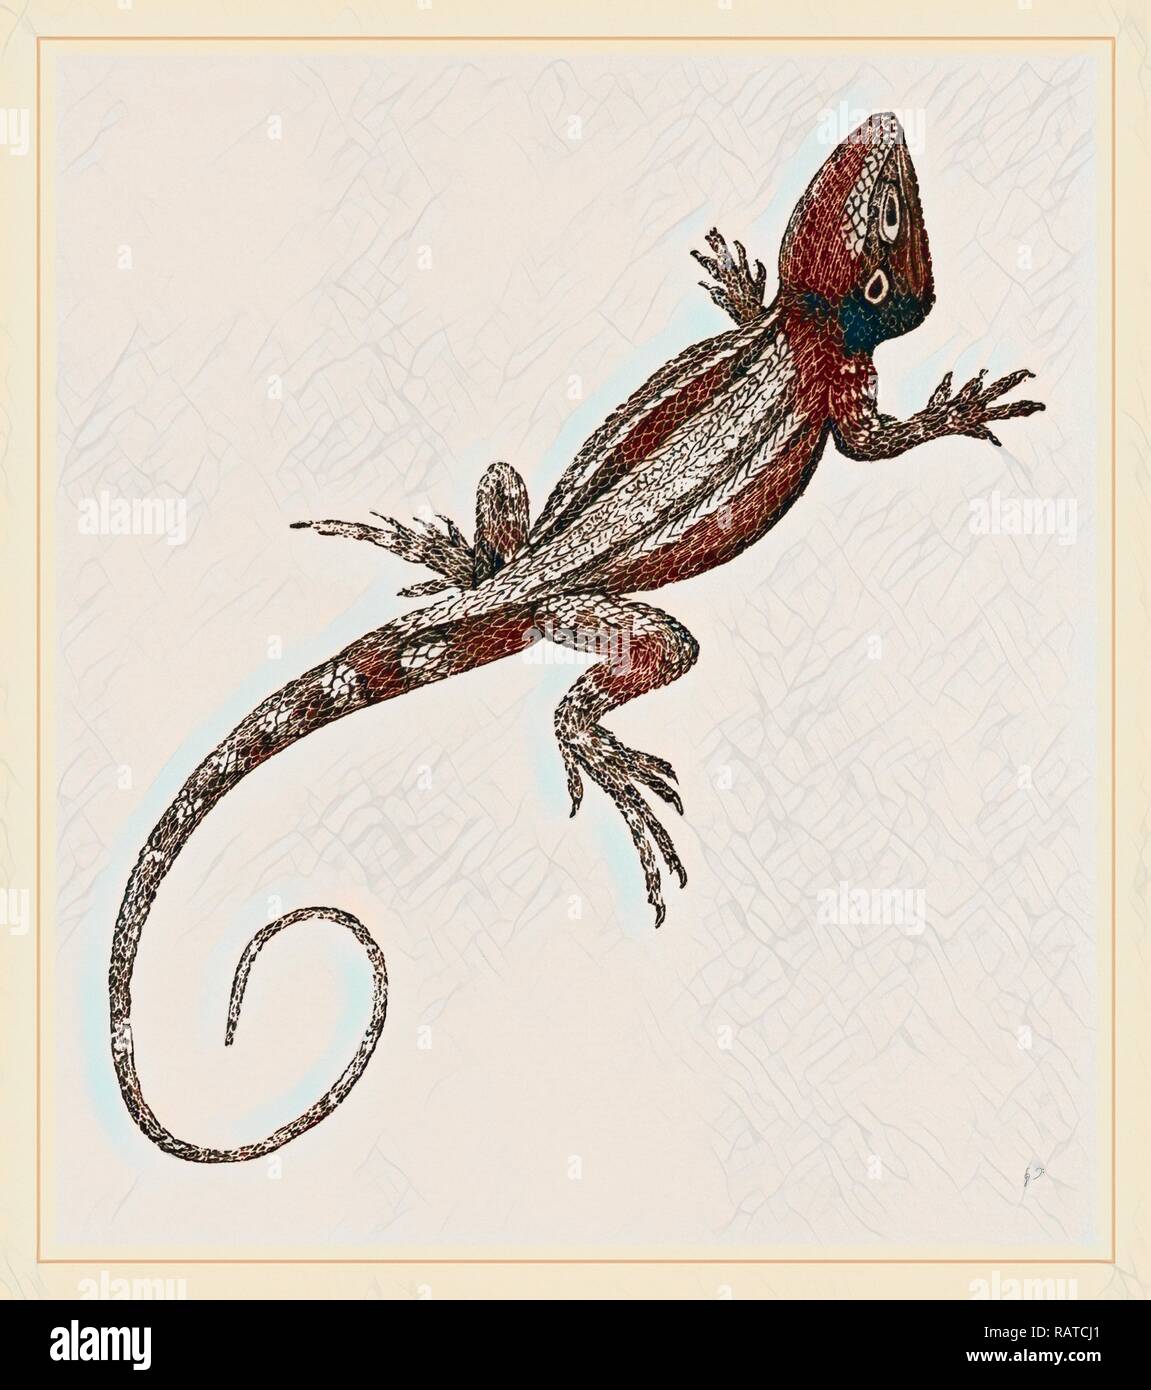 Muricated Lizard. Reimagined by Gibon. Classic art with a modern twist reimagined Stock Photo